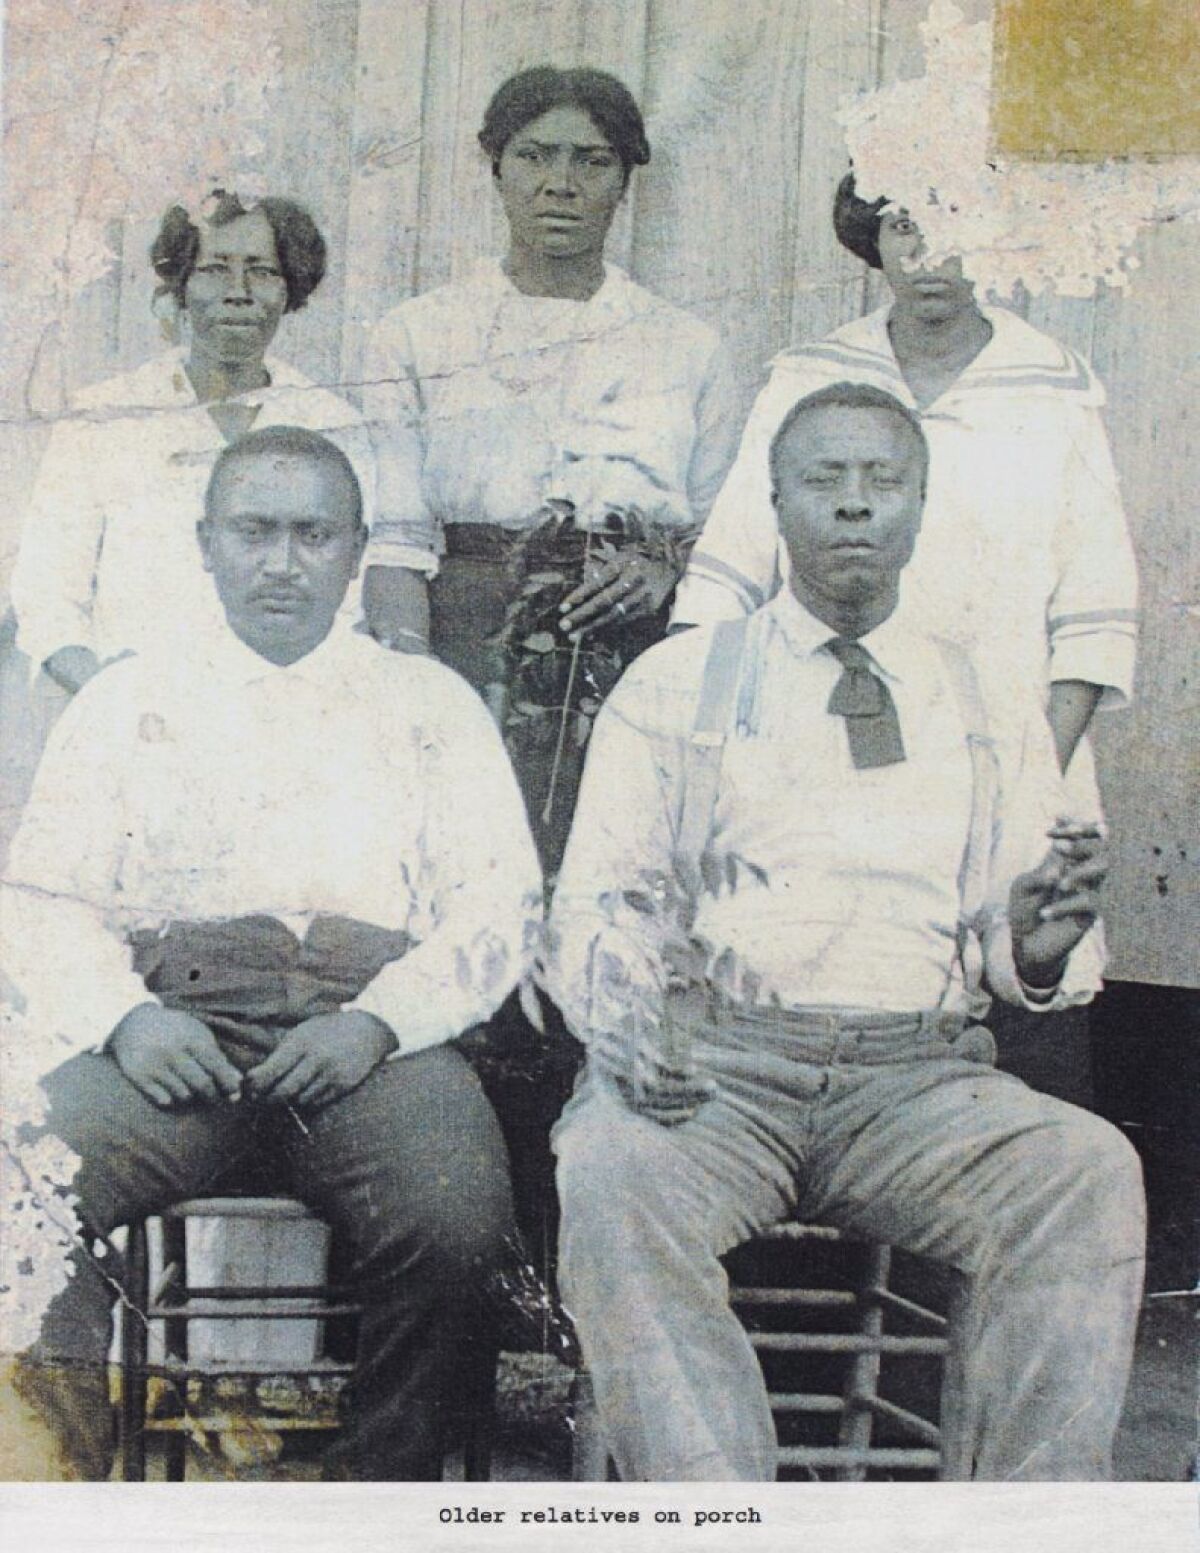 A page from Earnestine Smith's journal showing older relatives in a family portrait on the porch.